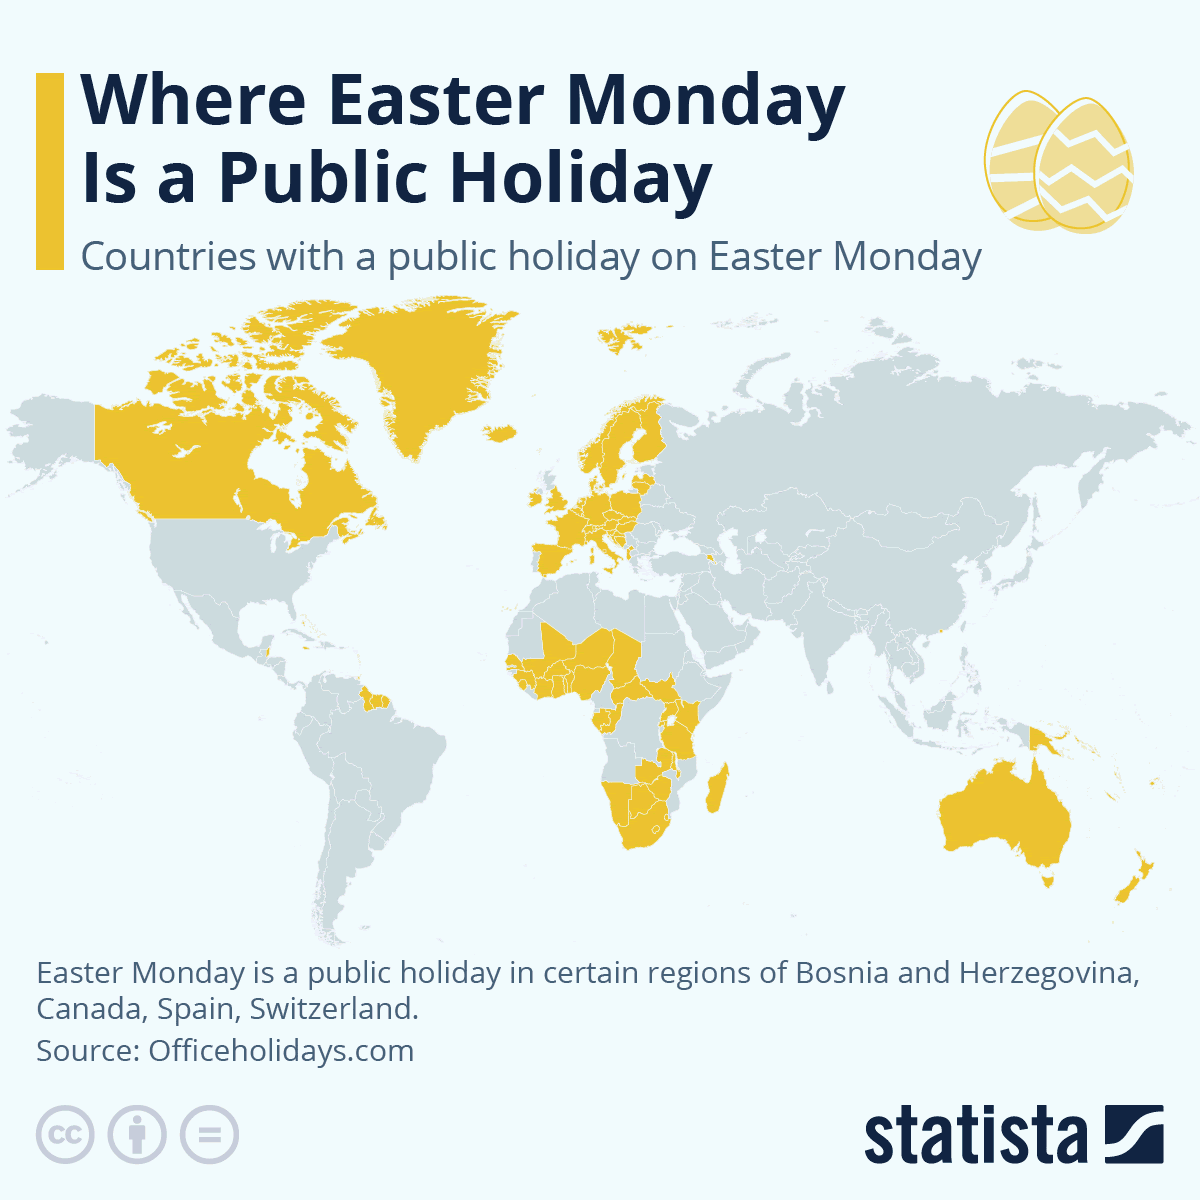 Where is Easter Monday a public holiday?